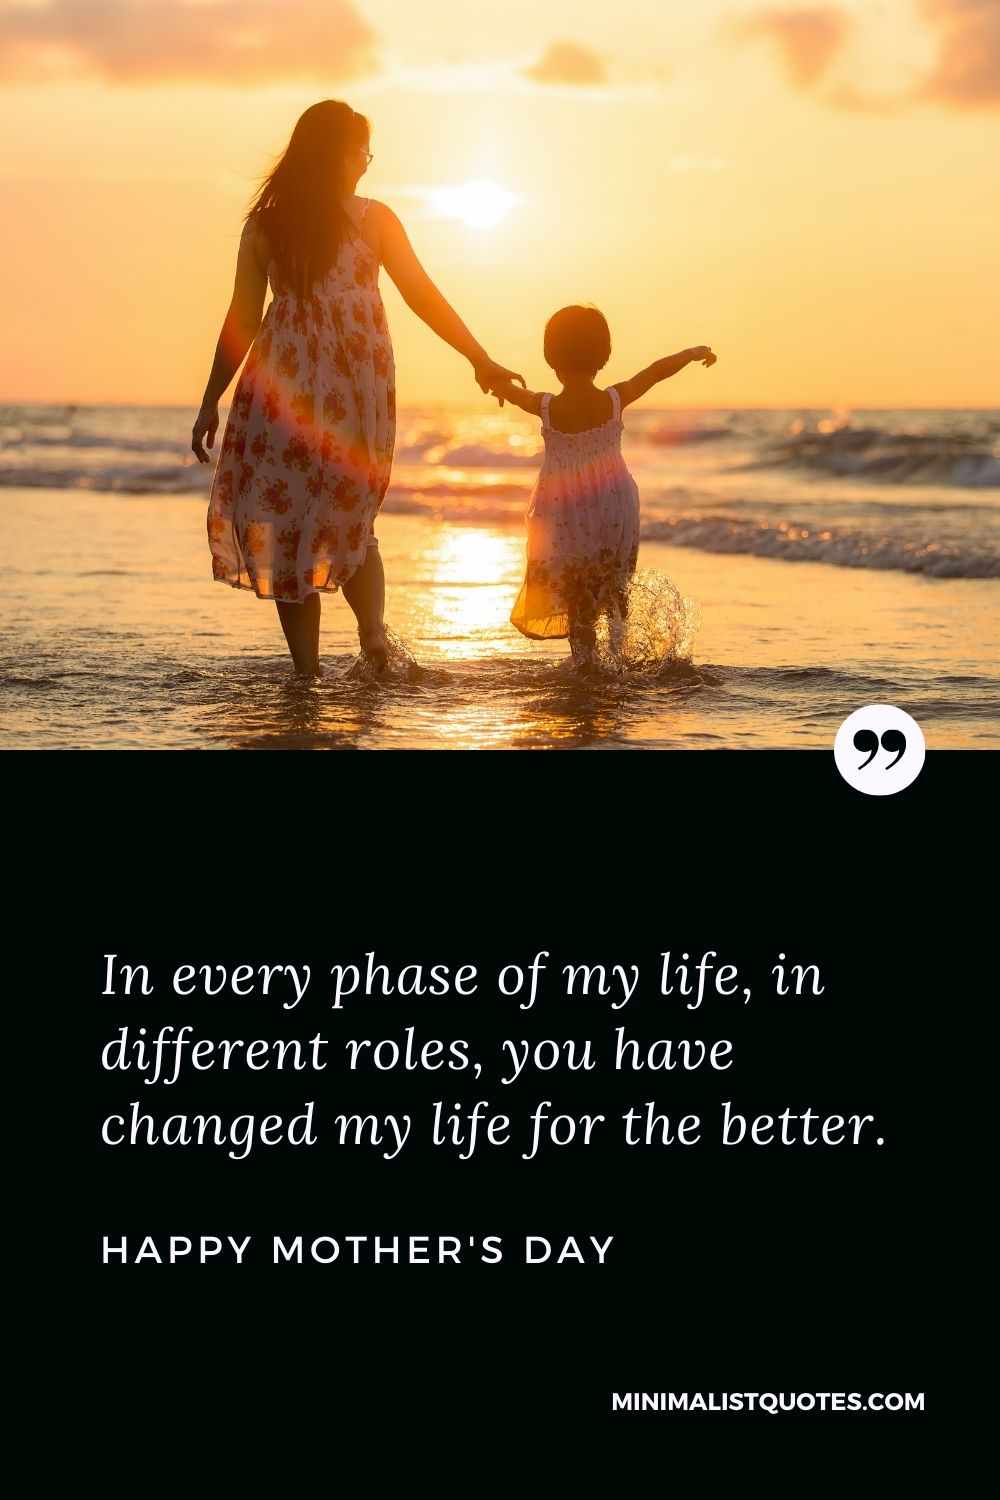 Mother's Day Wish & Message With HD Image: In every phase of my life, in different roles, you have changed my life for the better. Happy Mother's Day!